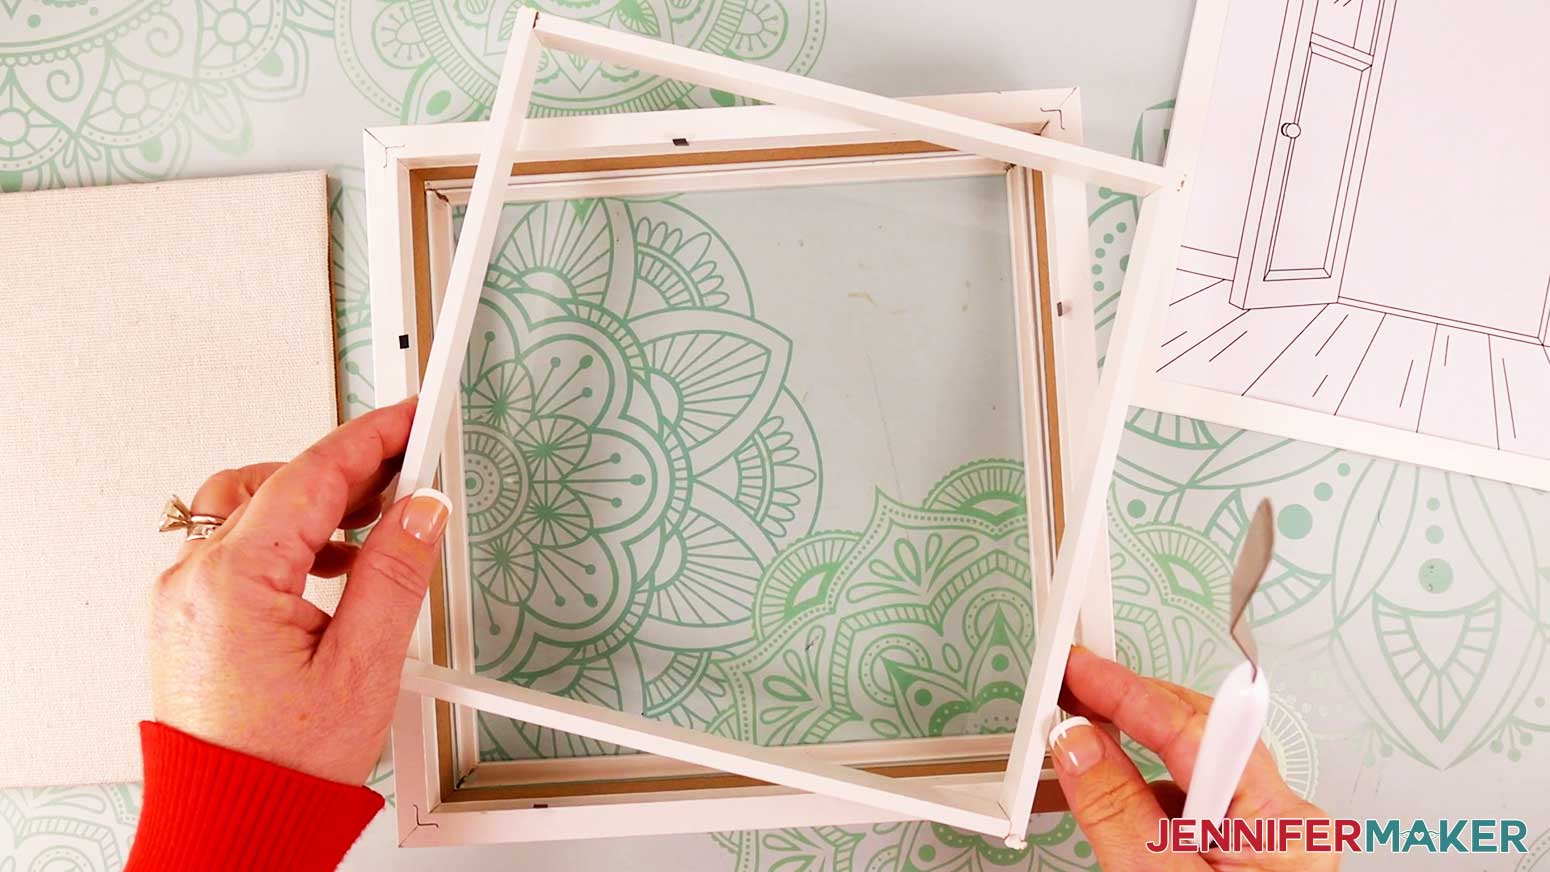 Remove the wooden insert from the frame in order to assemble the light painting shadow box